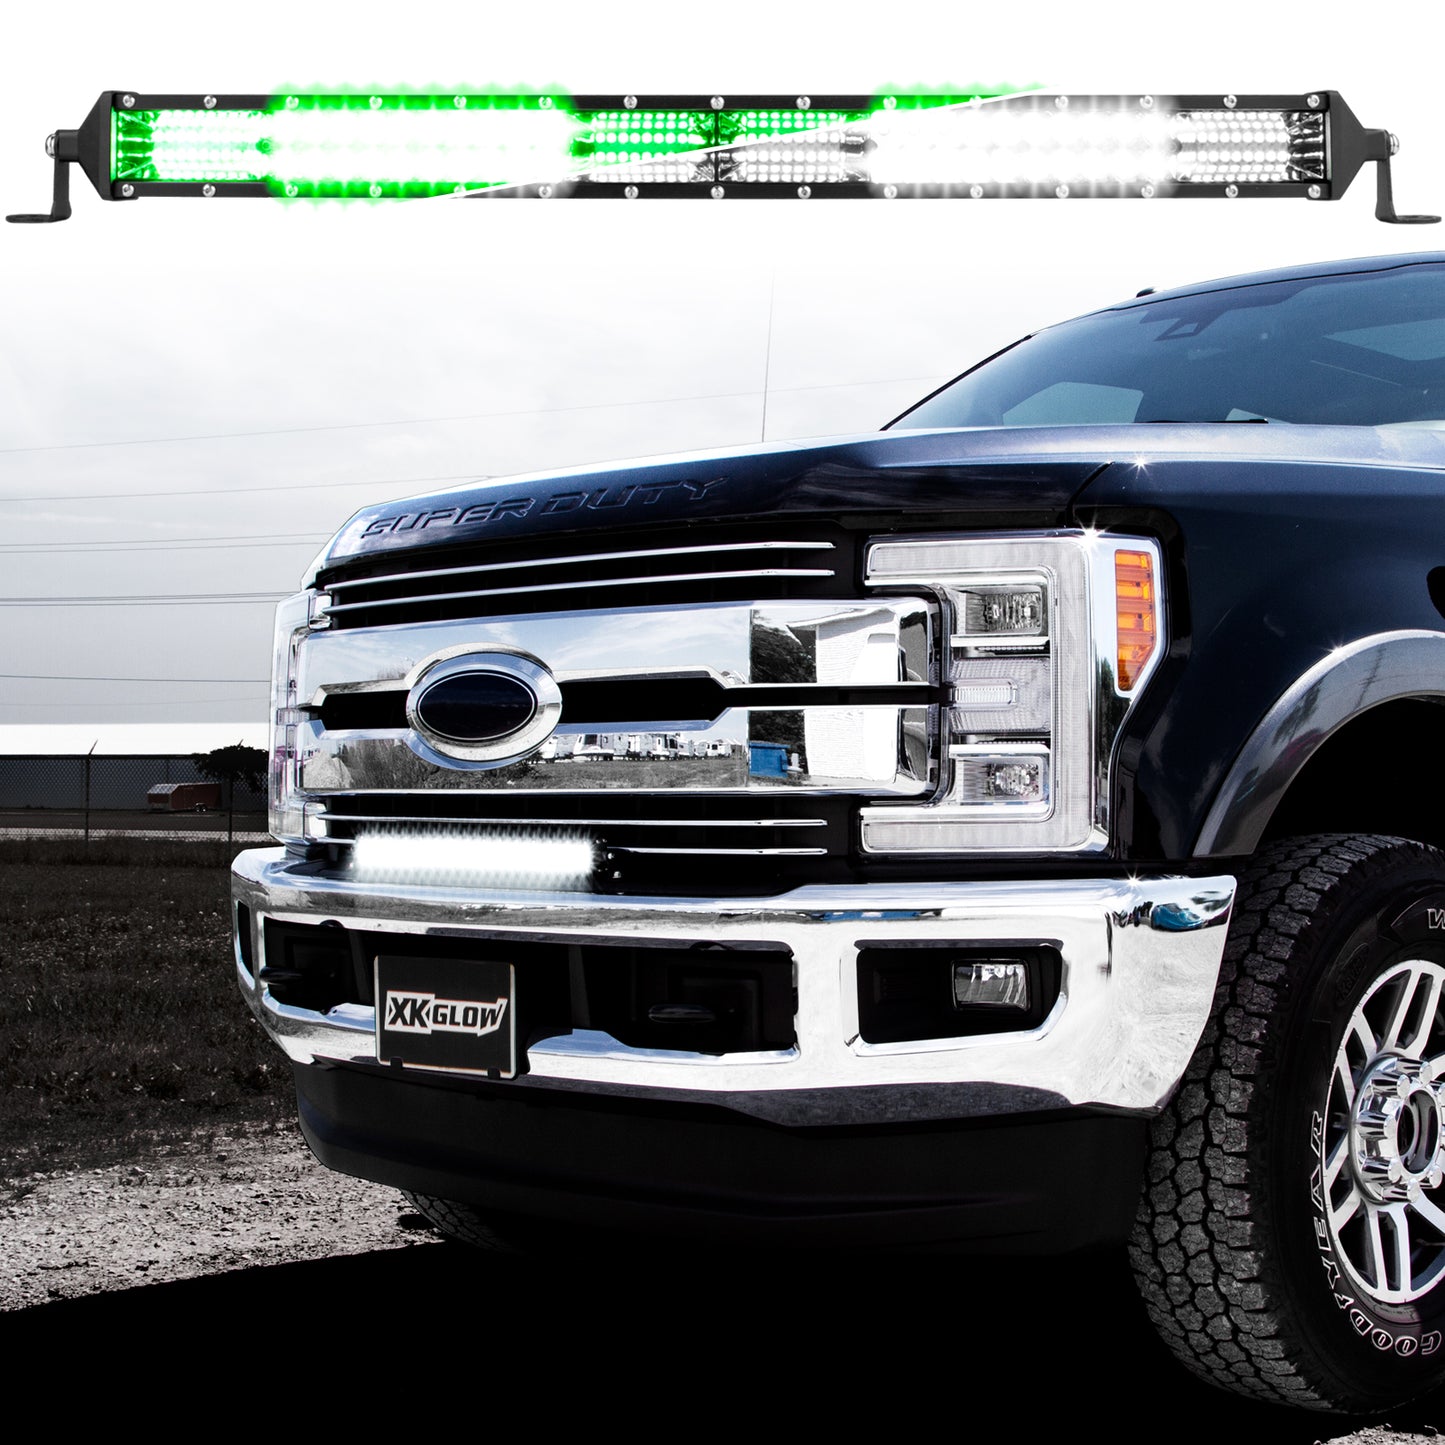 XKGLOW XK063020 20 2-in-1 LED Light Bar w/ Pure White and Hunting Green Flood and Spot Work Light w/ Free Wiring Harness and 3 Year Warranty